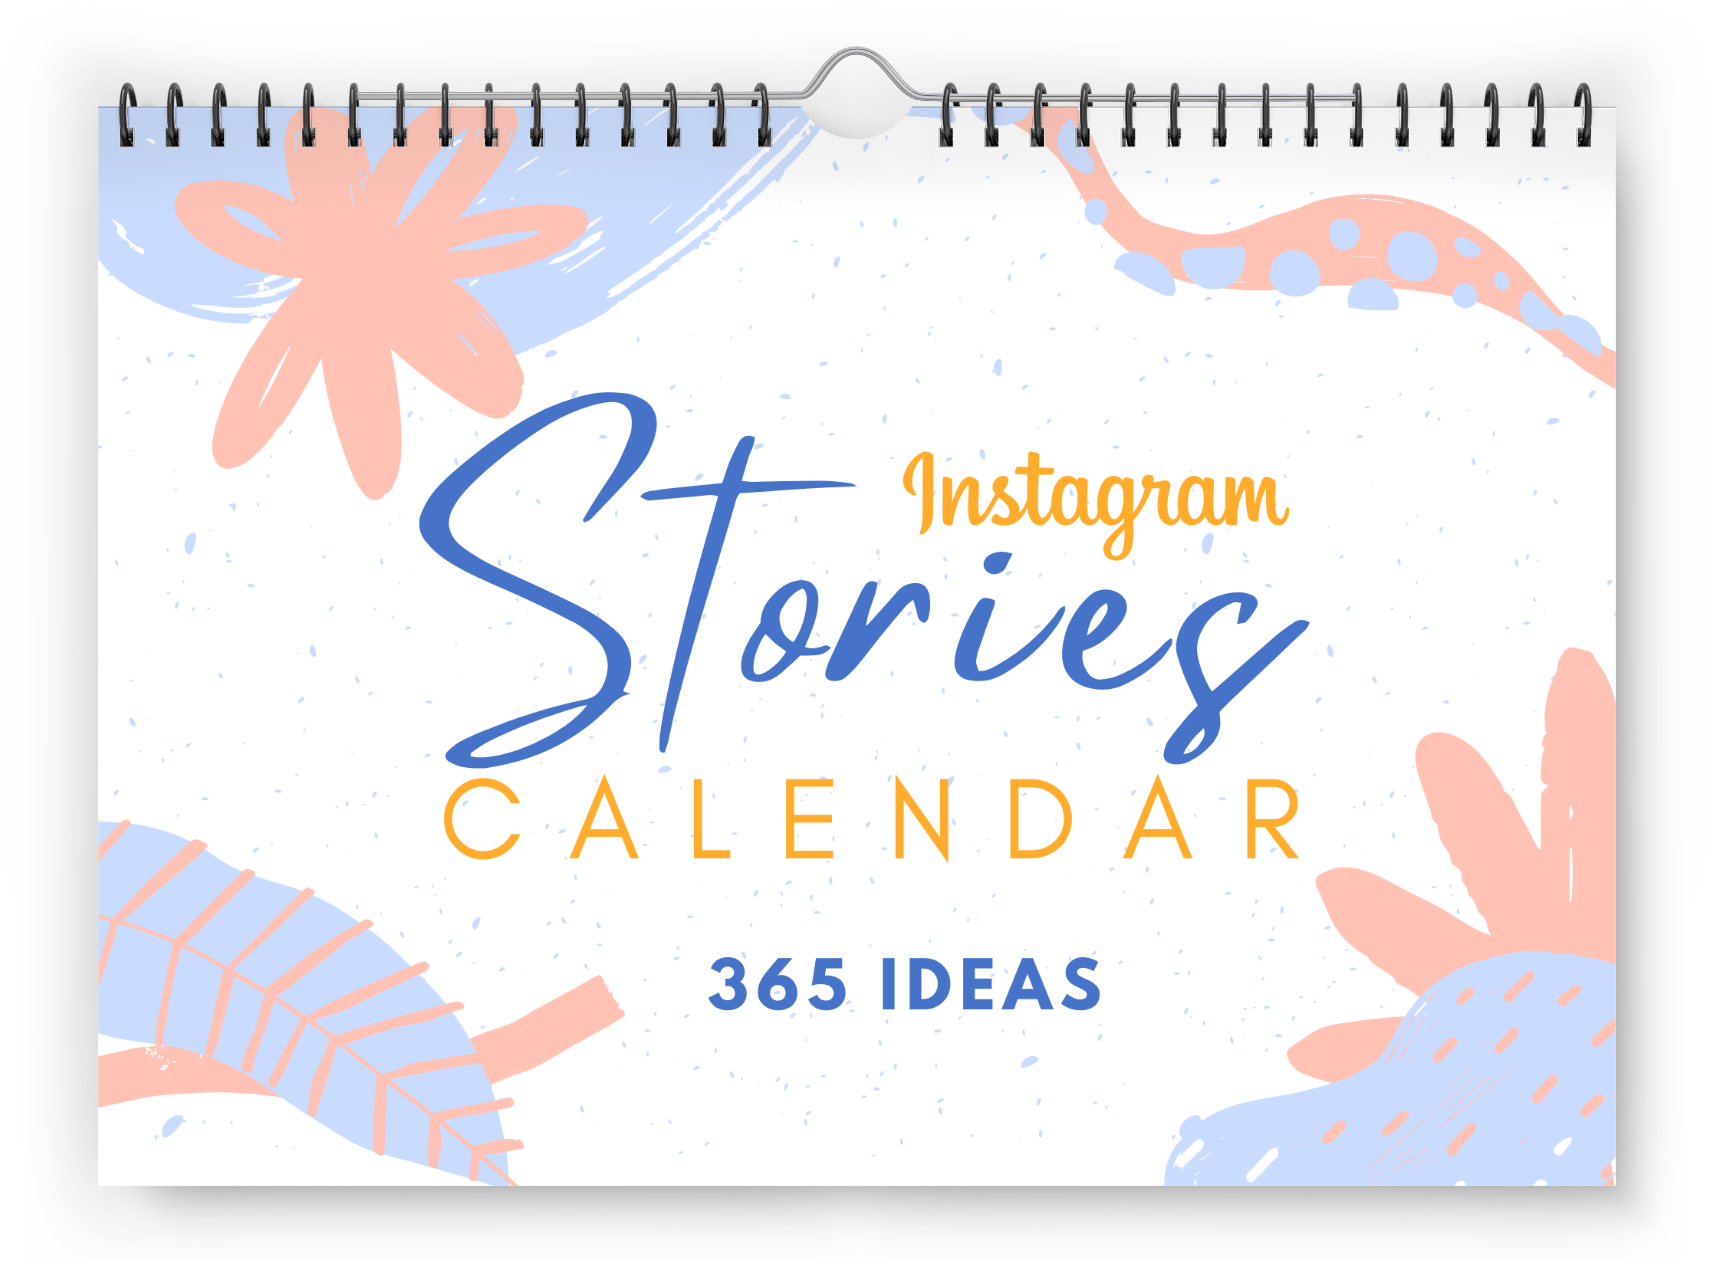 360-post-ideas-for-instagram-stories-90-off-today-social-media